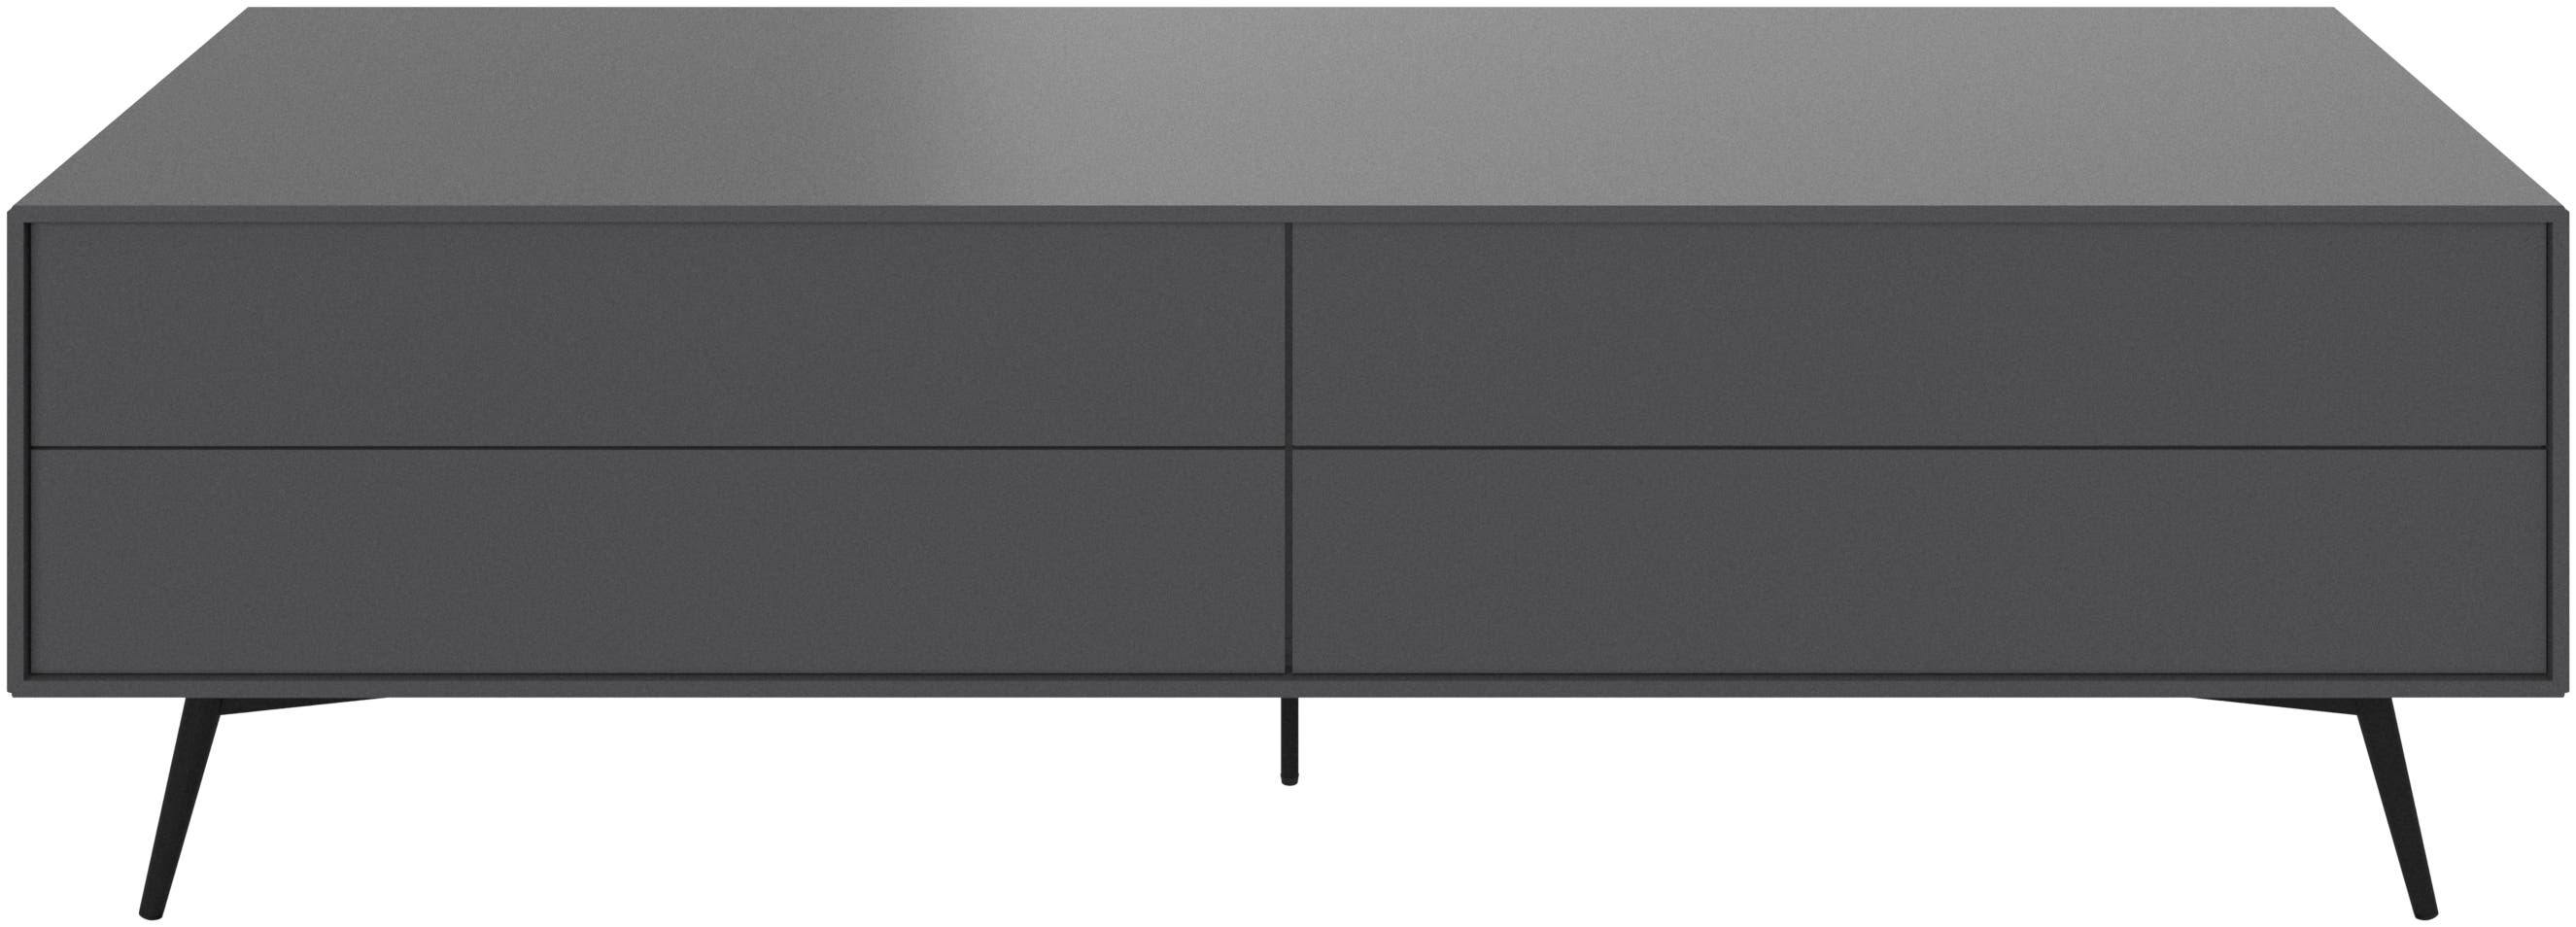 Fermo media unit with drop down door and drawer